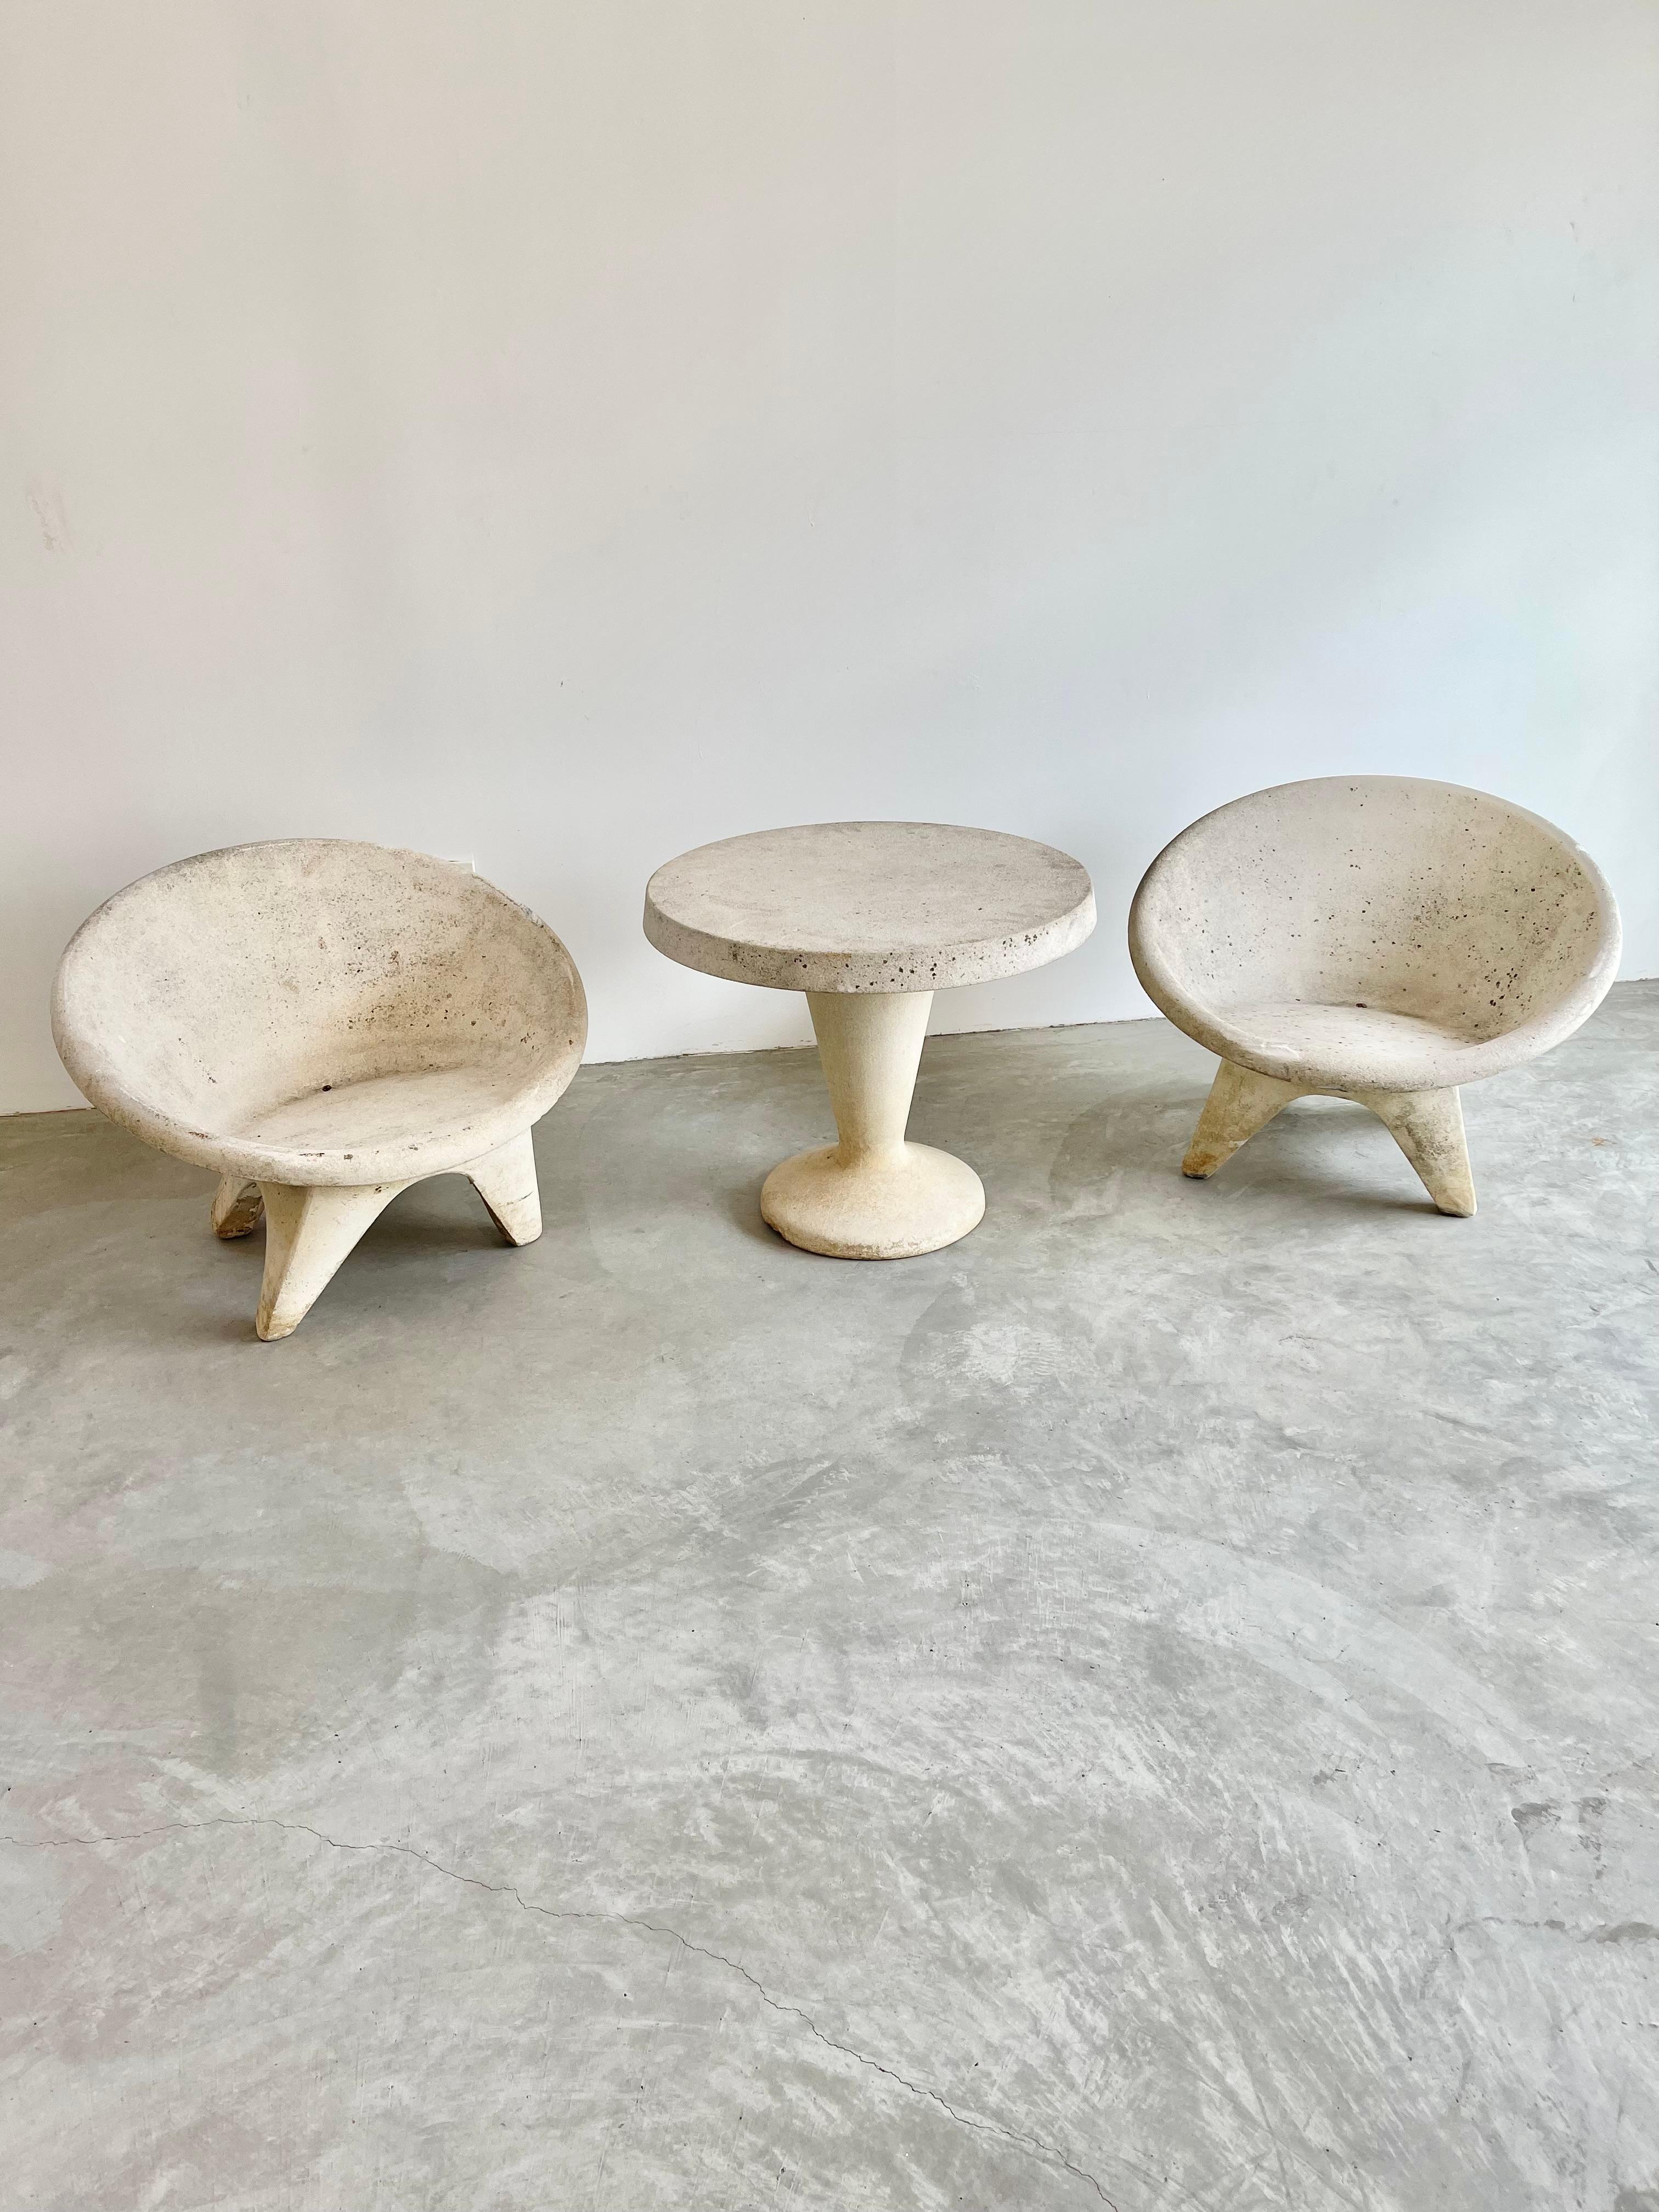 Stunning outdoor set consisting of two chairs with a matching table, all made of solid concrete. Round saucer seat with angular lets. Incredible modern design with very light patina. Factory drilled hole in each chair for water to drain. Great